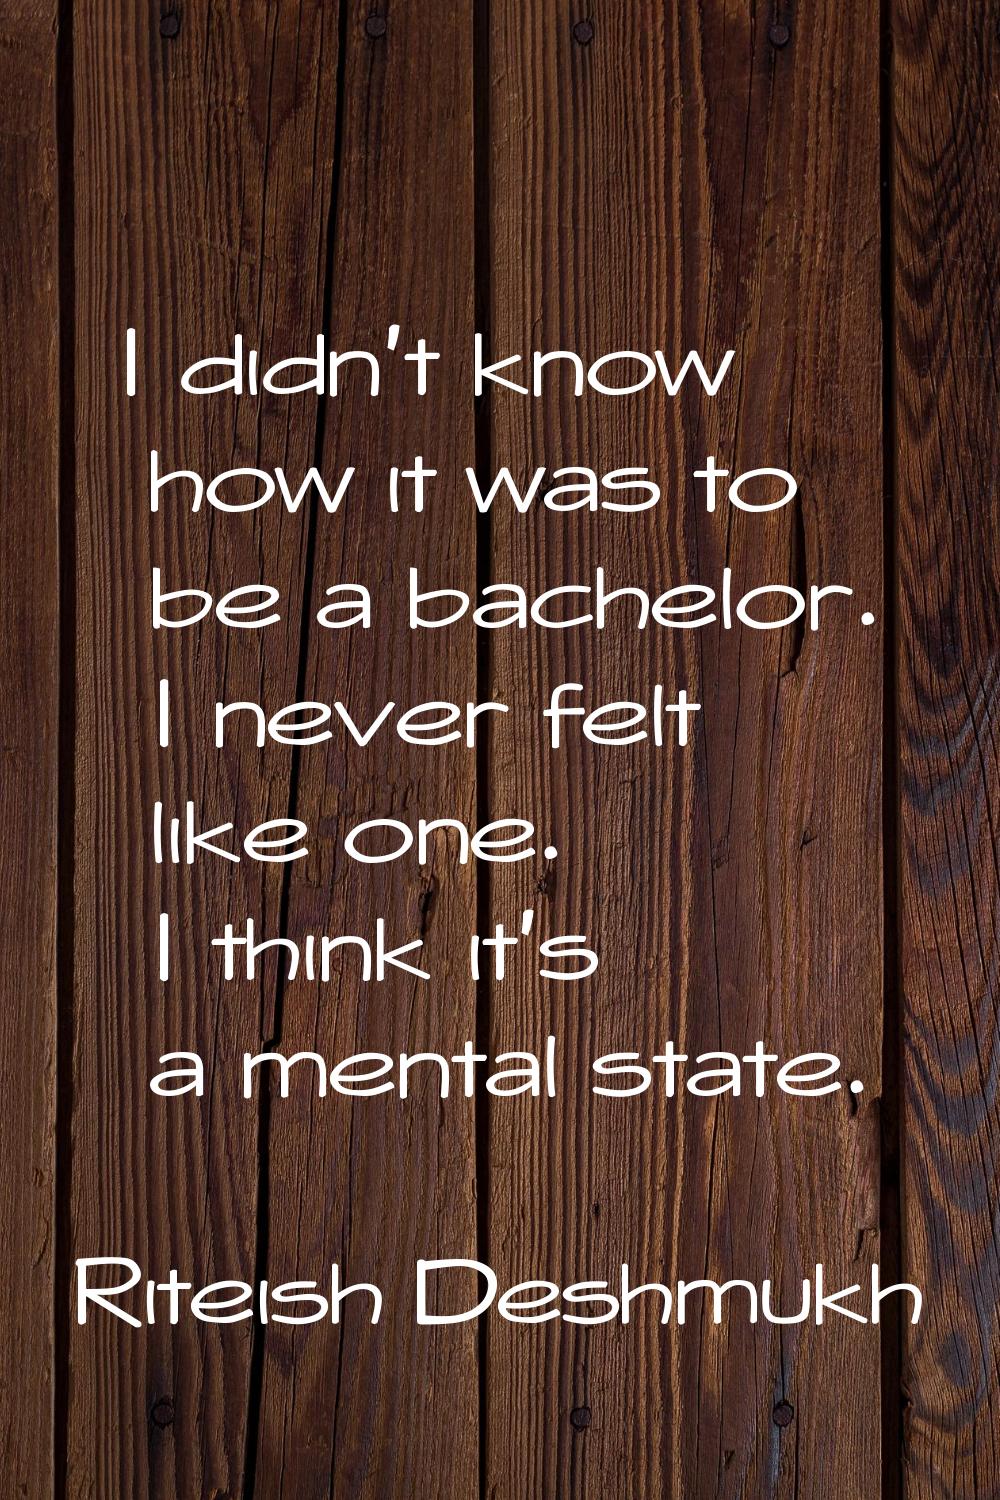 I didn't know how it was to be a bachelor. I never felt like one. I think it's a mental state.